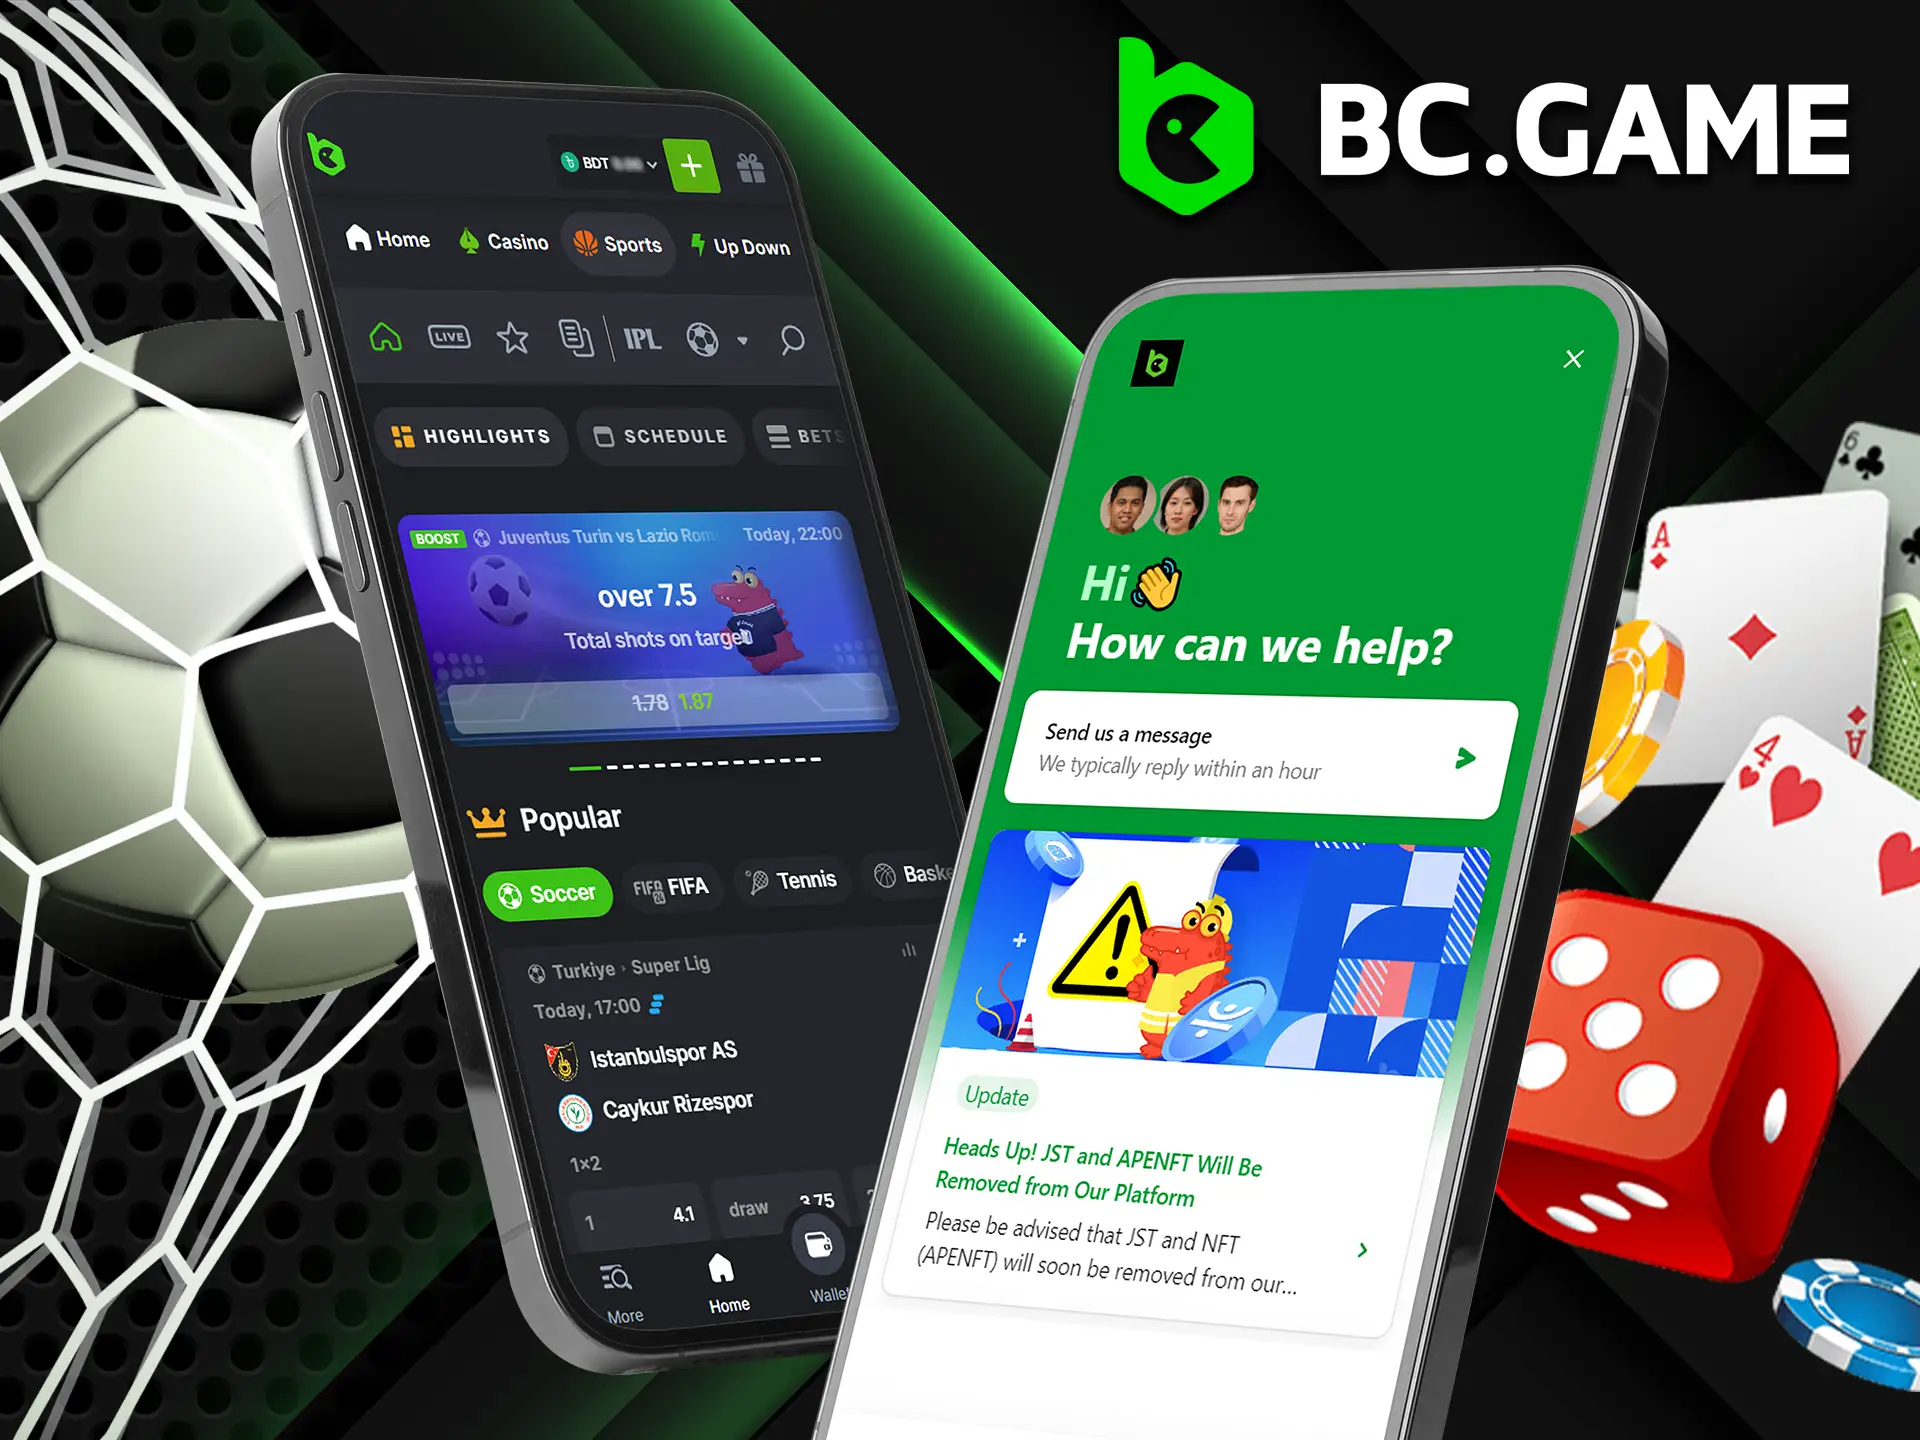 The BC GAME app is secure and guarantees your privacy.